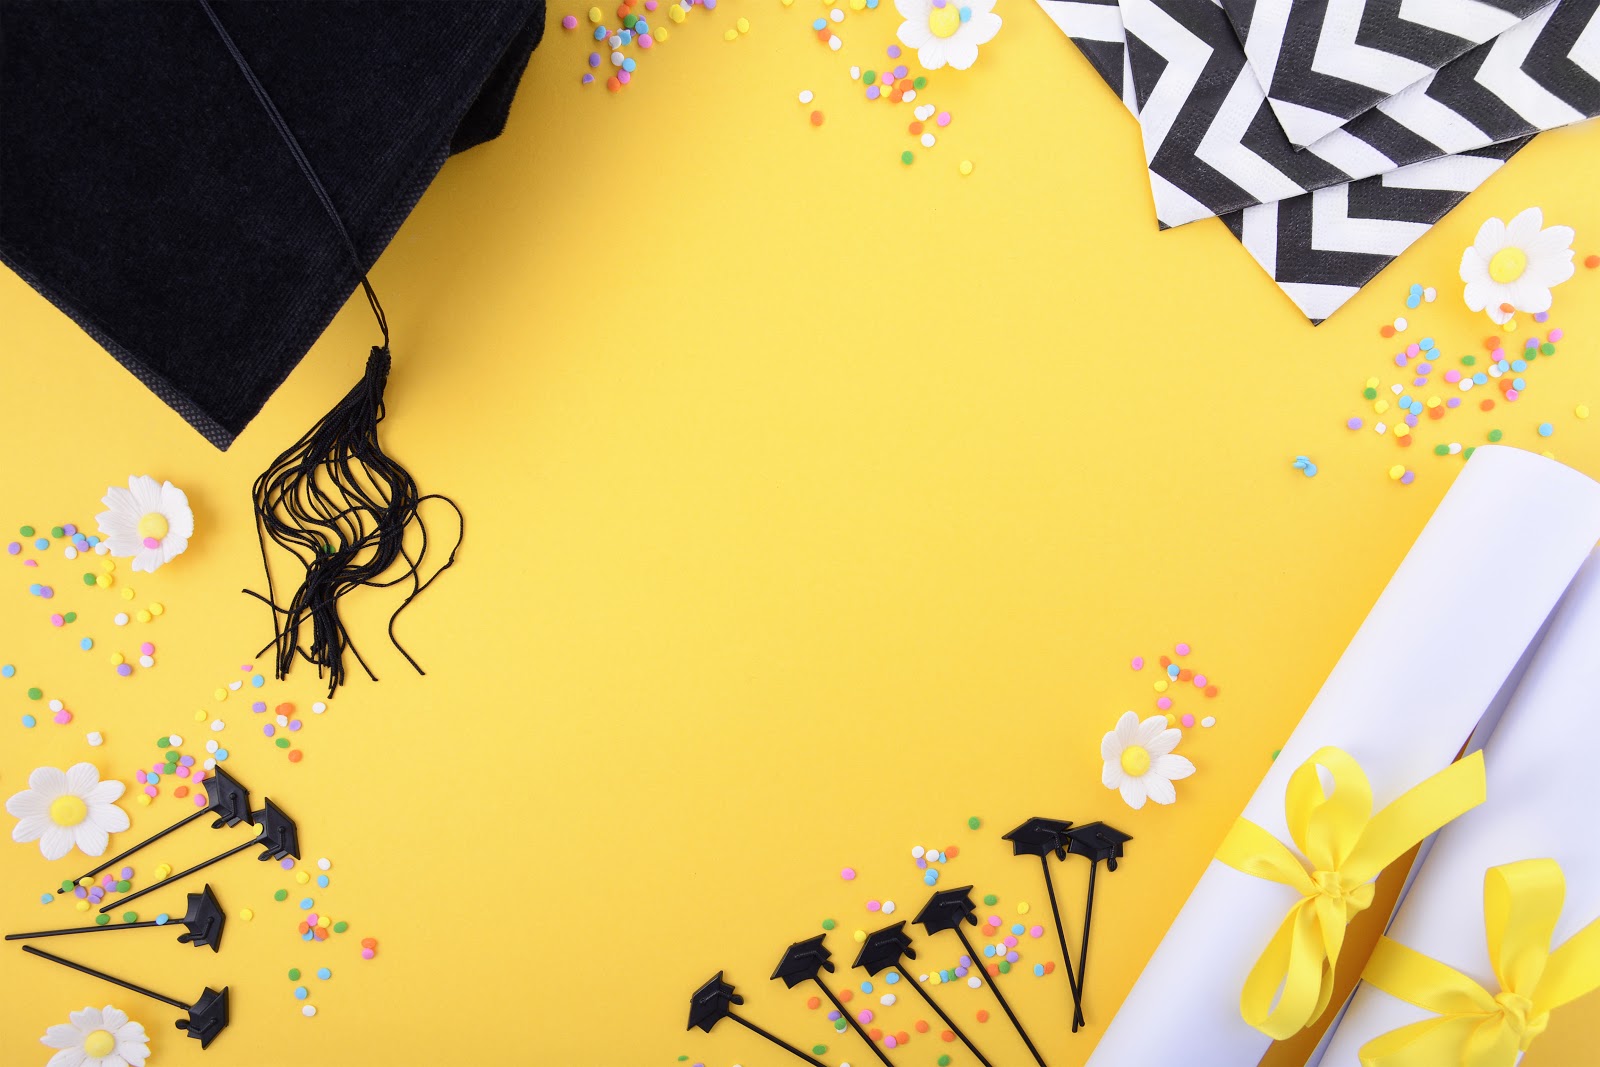 15 Graduation Party Games to Inspire Your Celebration